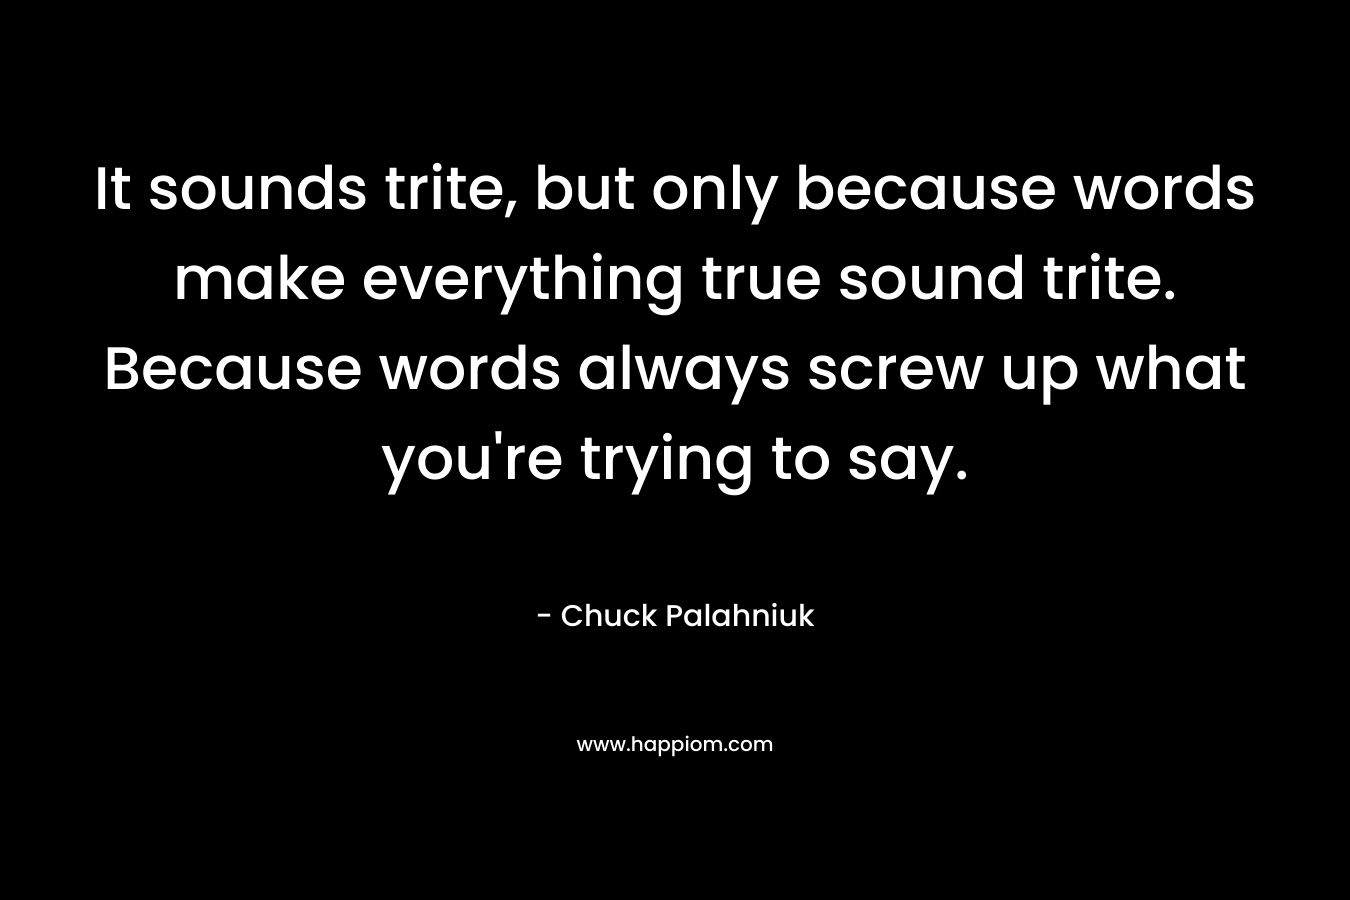 It sounds trite, but only because words make everything true sound trite. Because words always screw up what you're trying to say.